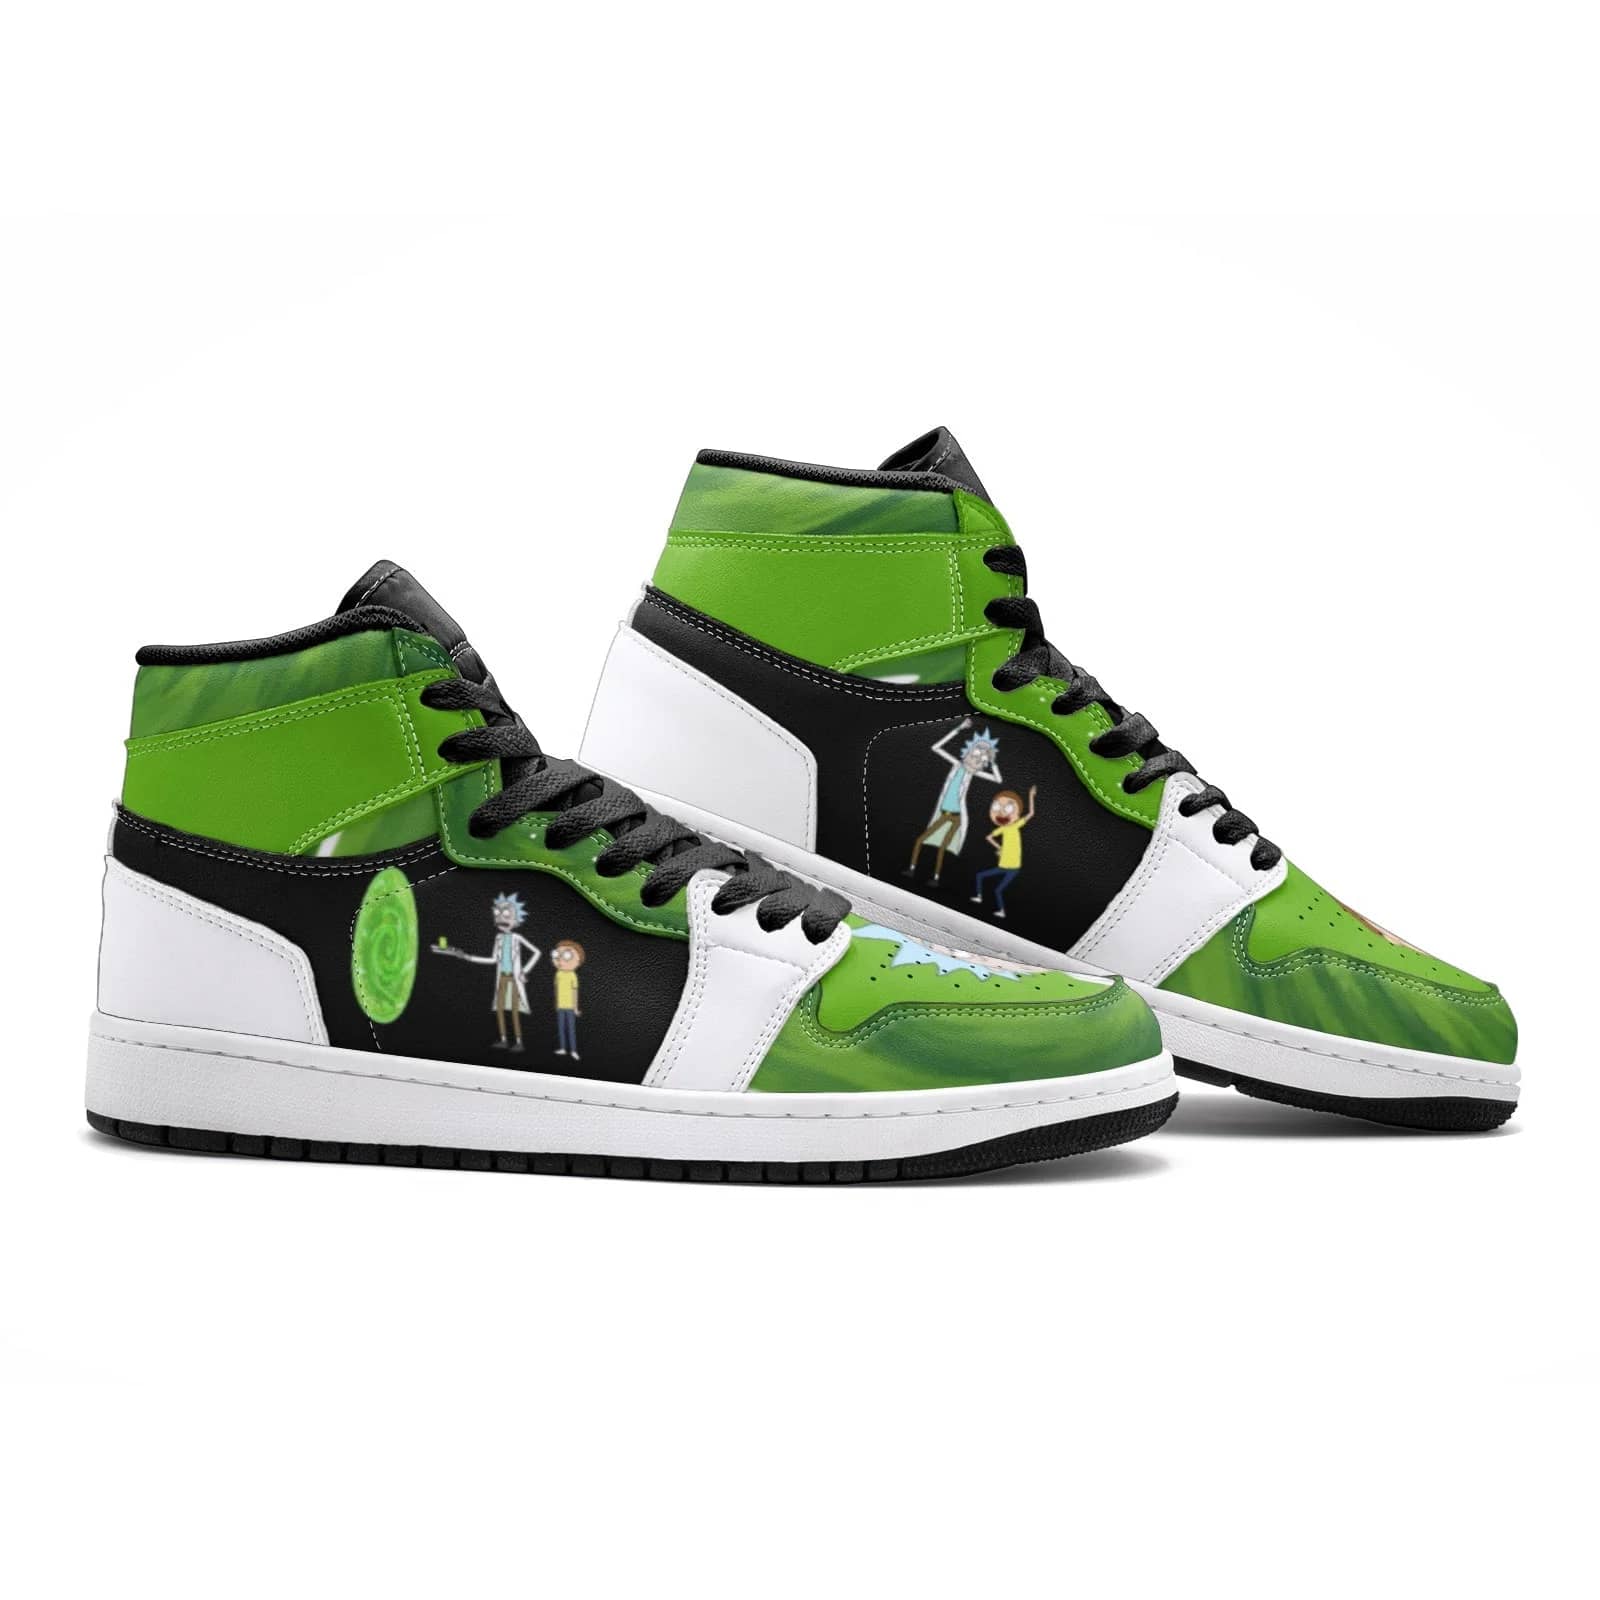 Inktee Store - Travel Time Rick And Morty Air Jordan Shoes Image